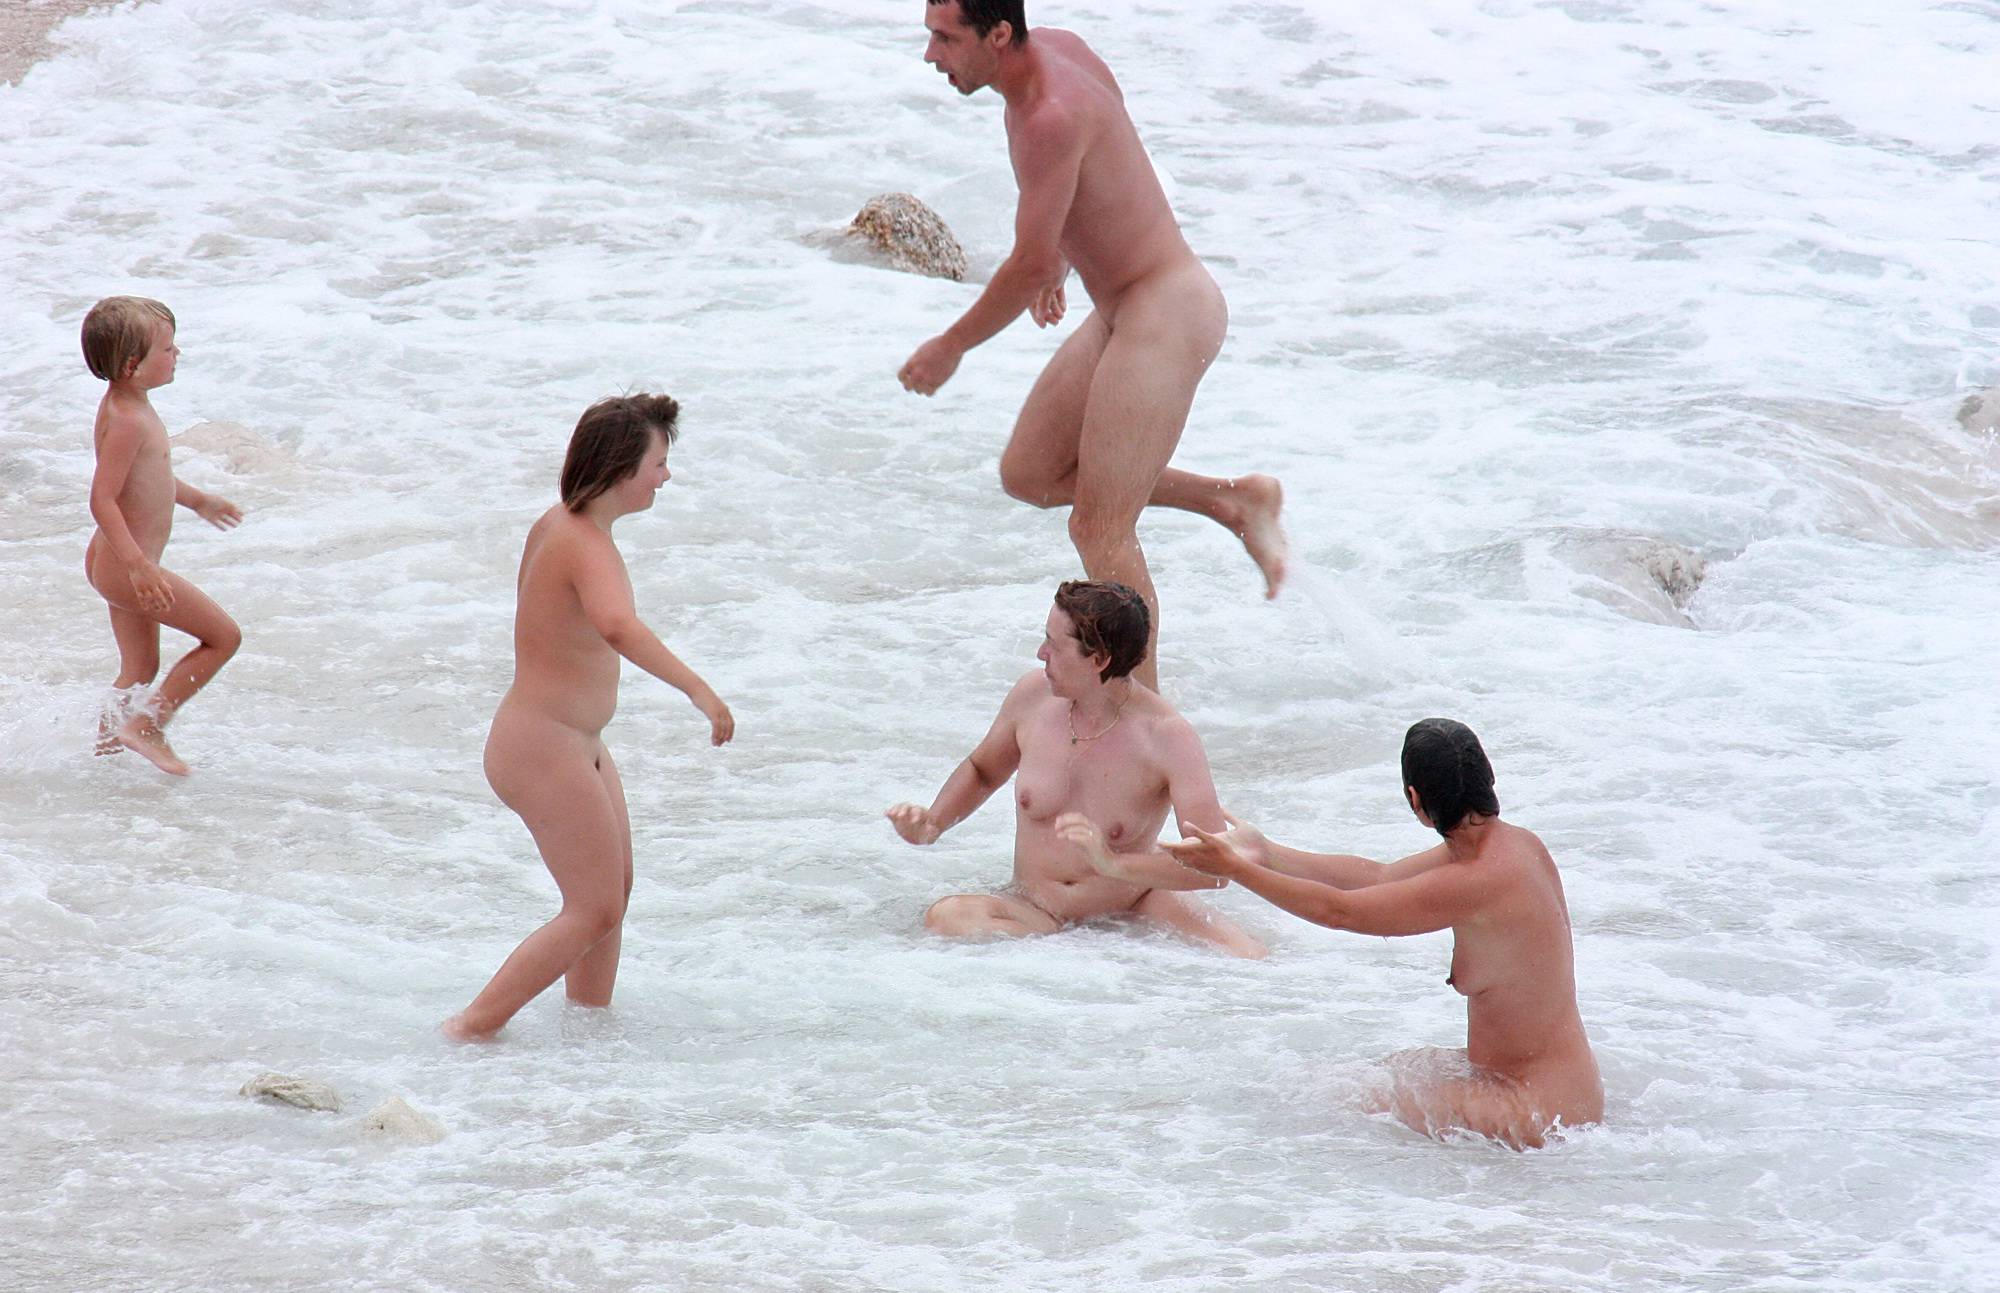 Pure Nudism Images-Wading In Coastal Waves - 3